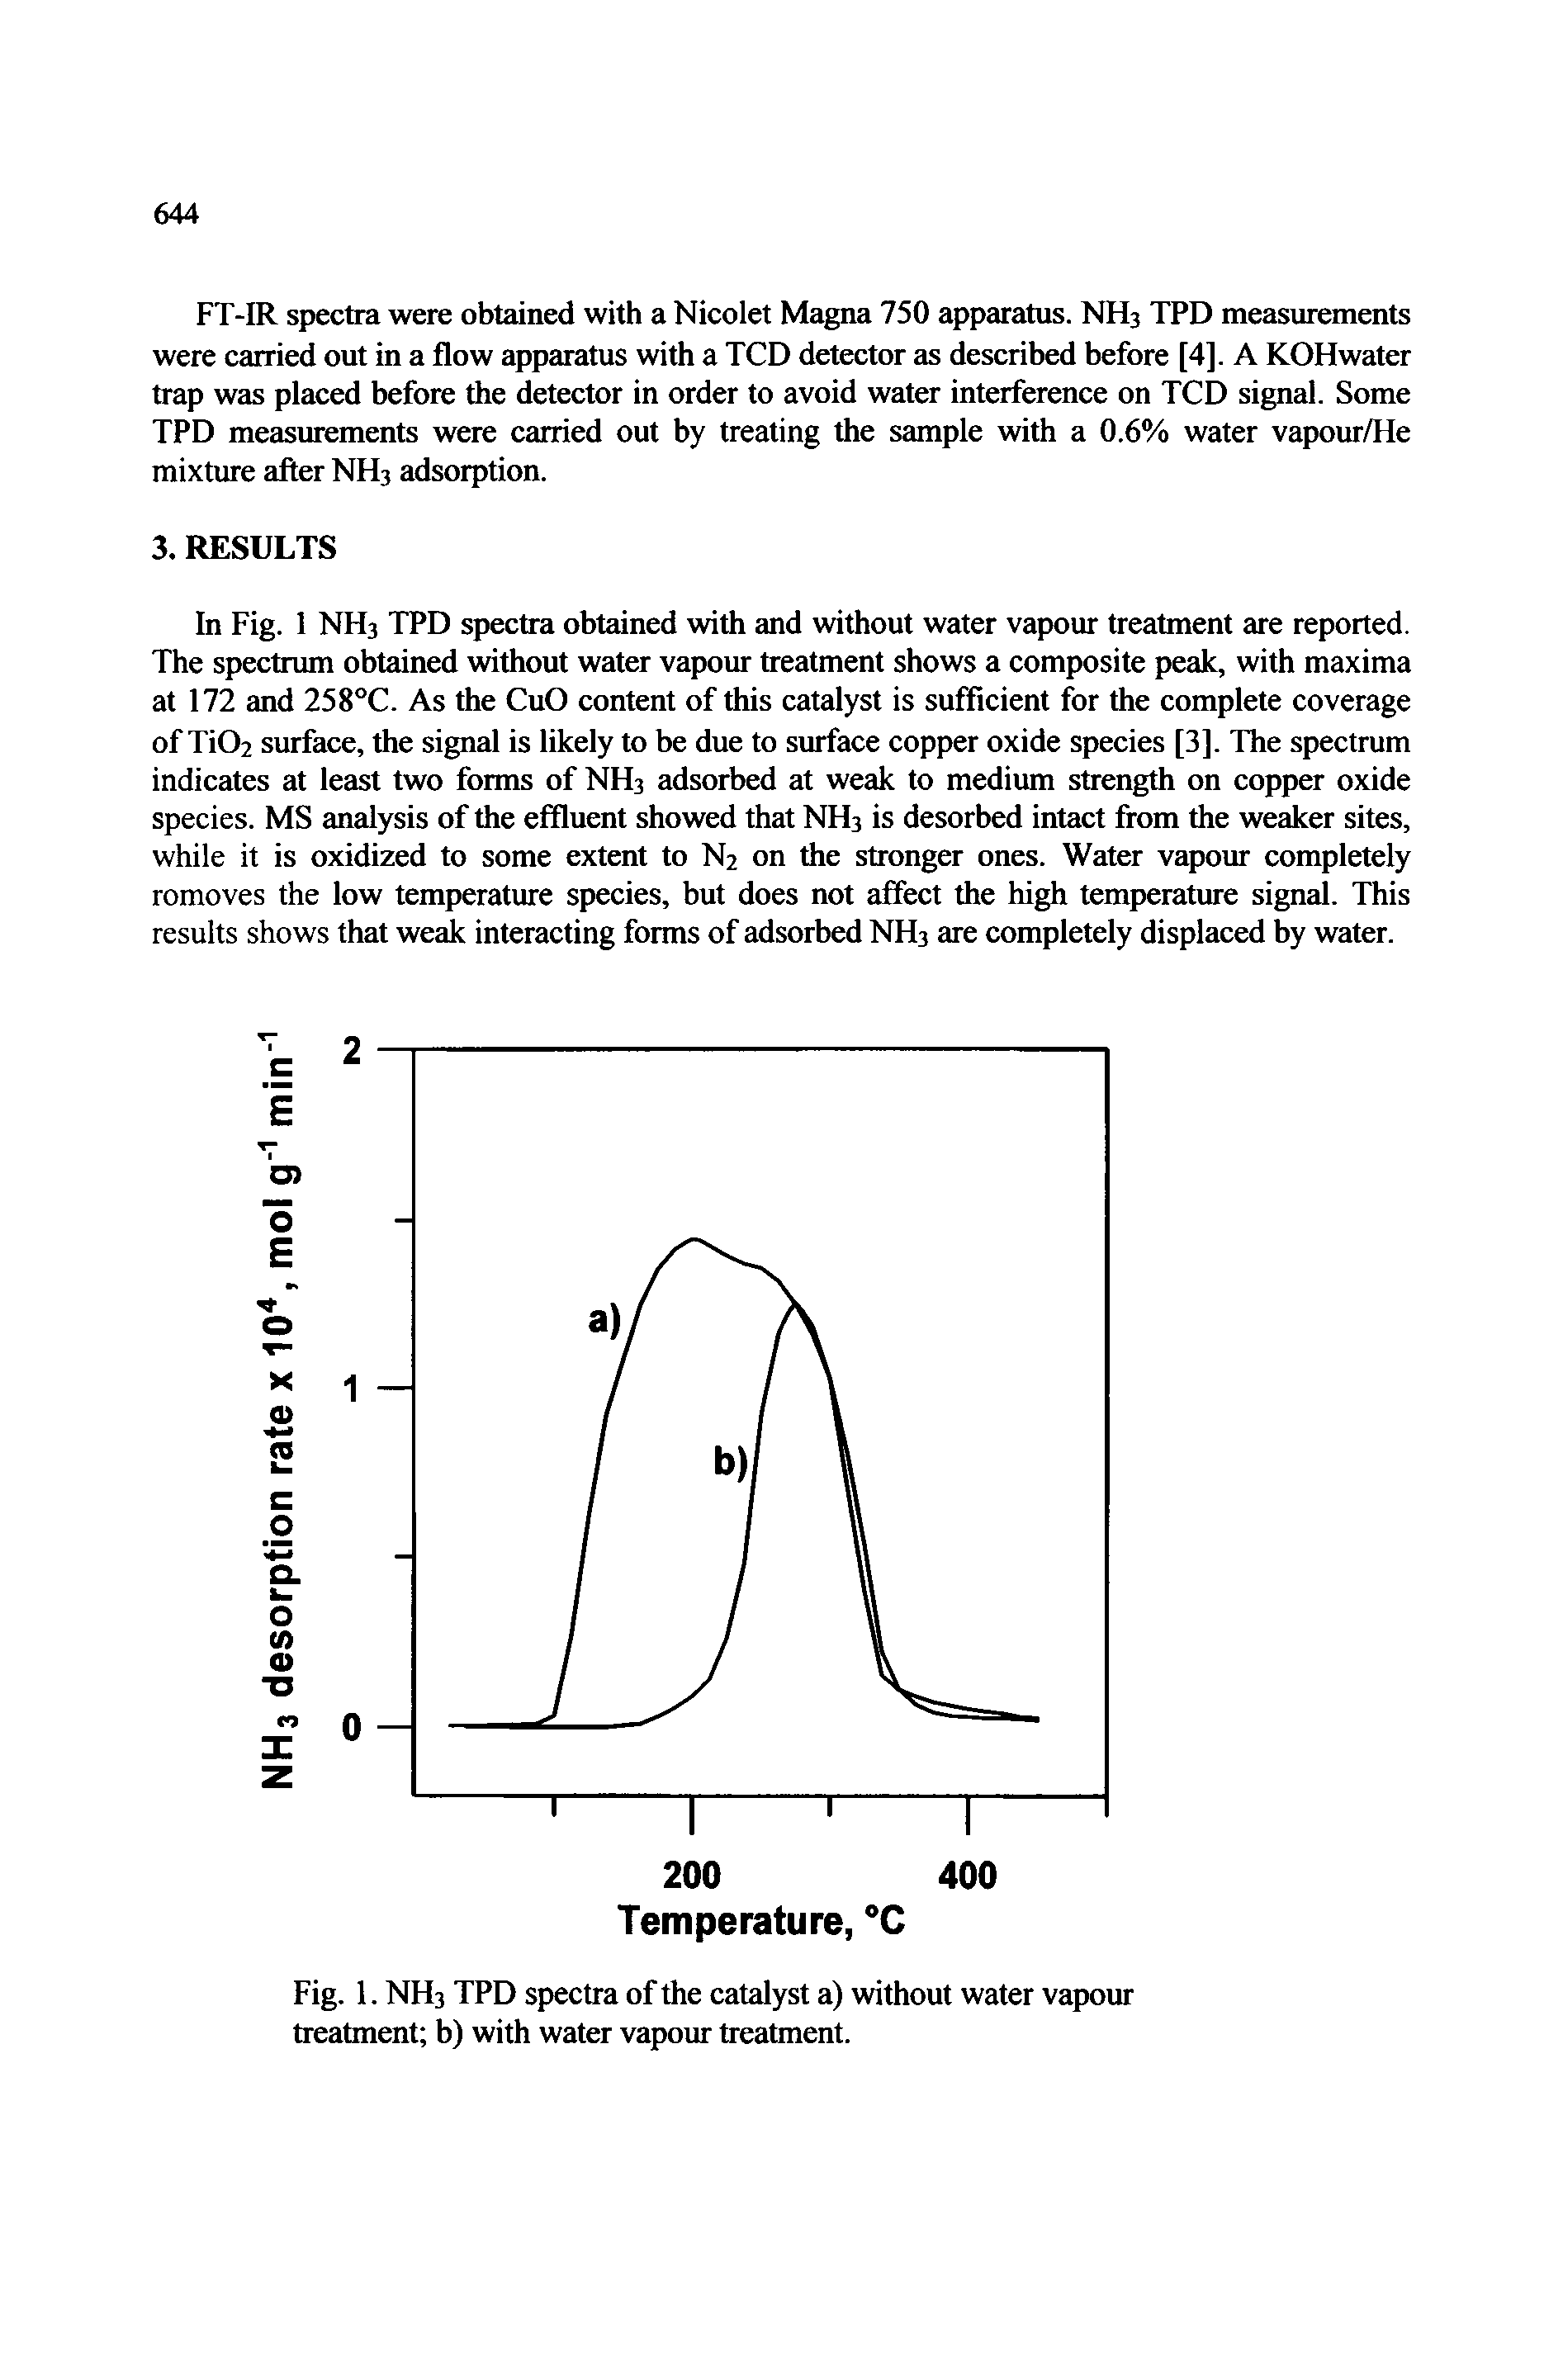 Fig. 1. NH3 TPD spectra of the catalyst a) without water vapour treatment b) with water vapour treatment.